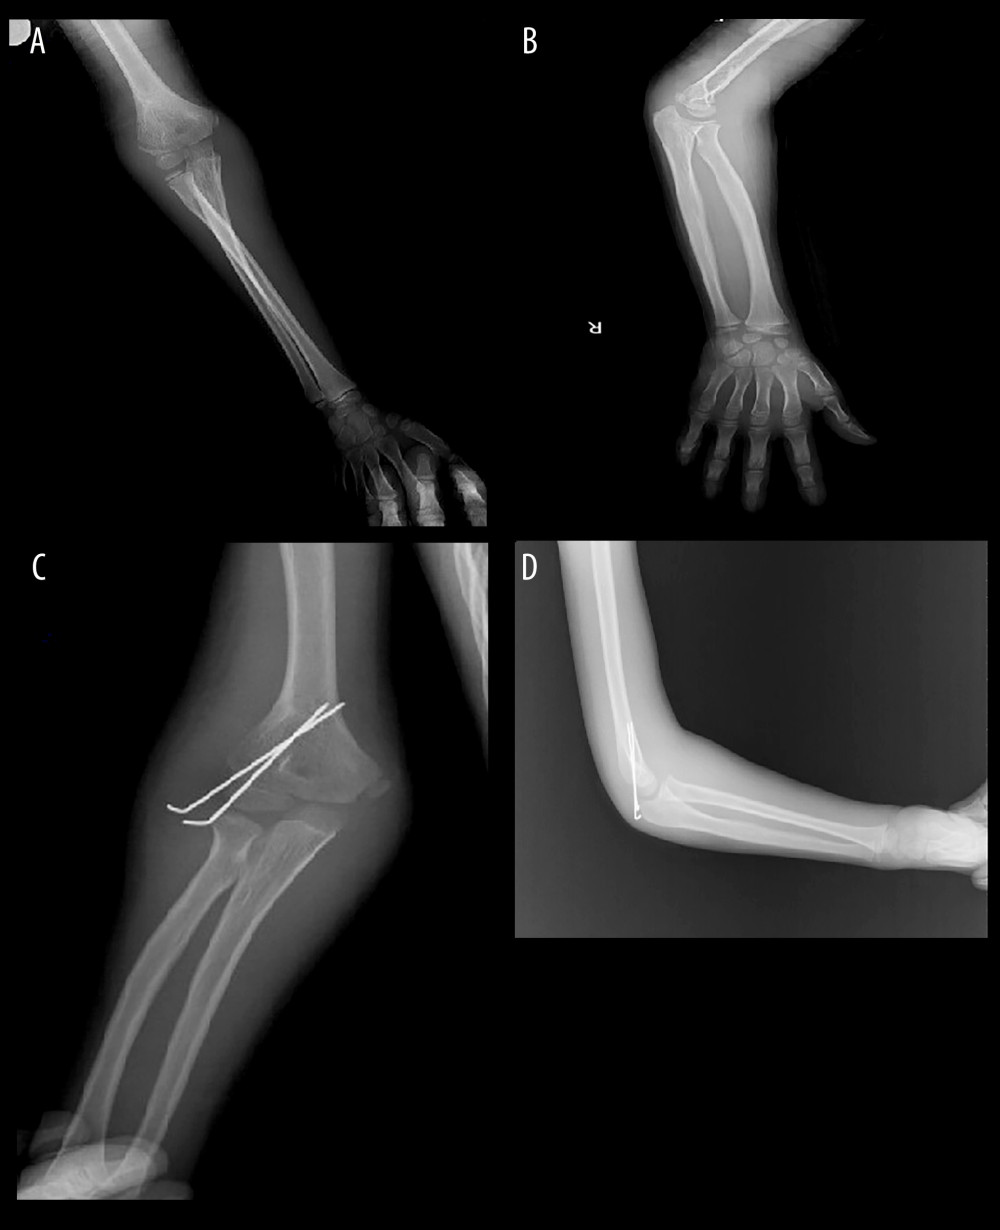 (A–D) An 8-year-old male patient presenting with a lateral condyle fracture after a playground injury underwent closed reduction and percutaneous pinning. Figure 1 was captured as a screenshot from the PACS Infinitt system used in the hospital and transferred to the computer. No additional processing was performed.